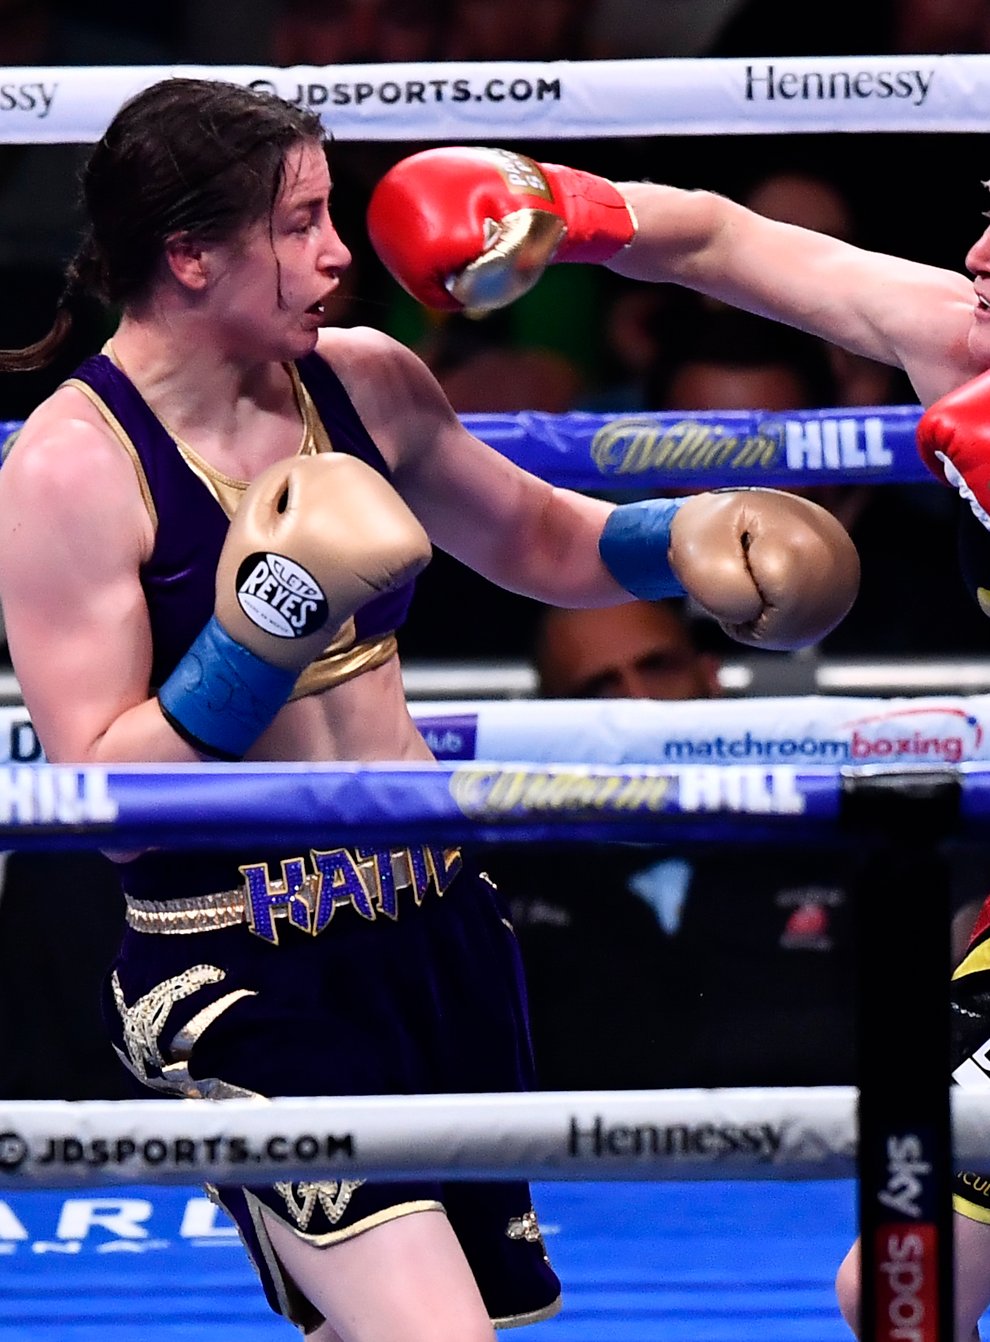 Taylor and Persoon fought a thrilling ten rounds in June 2019